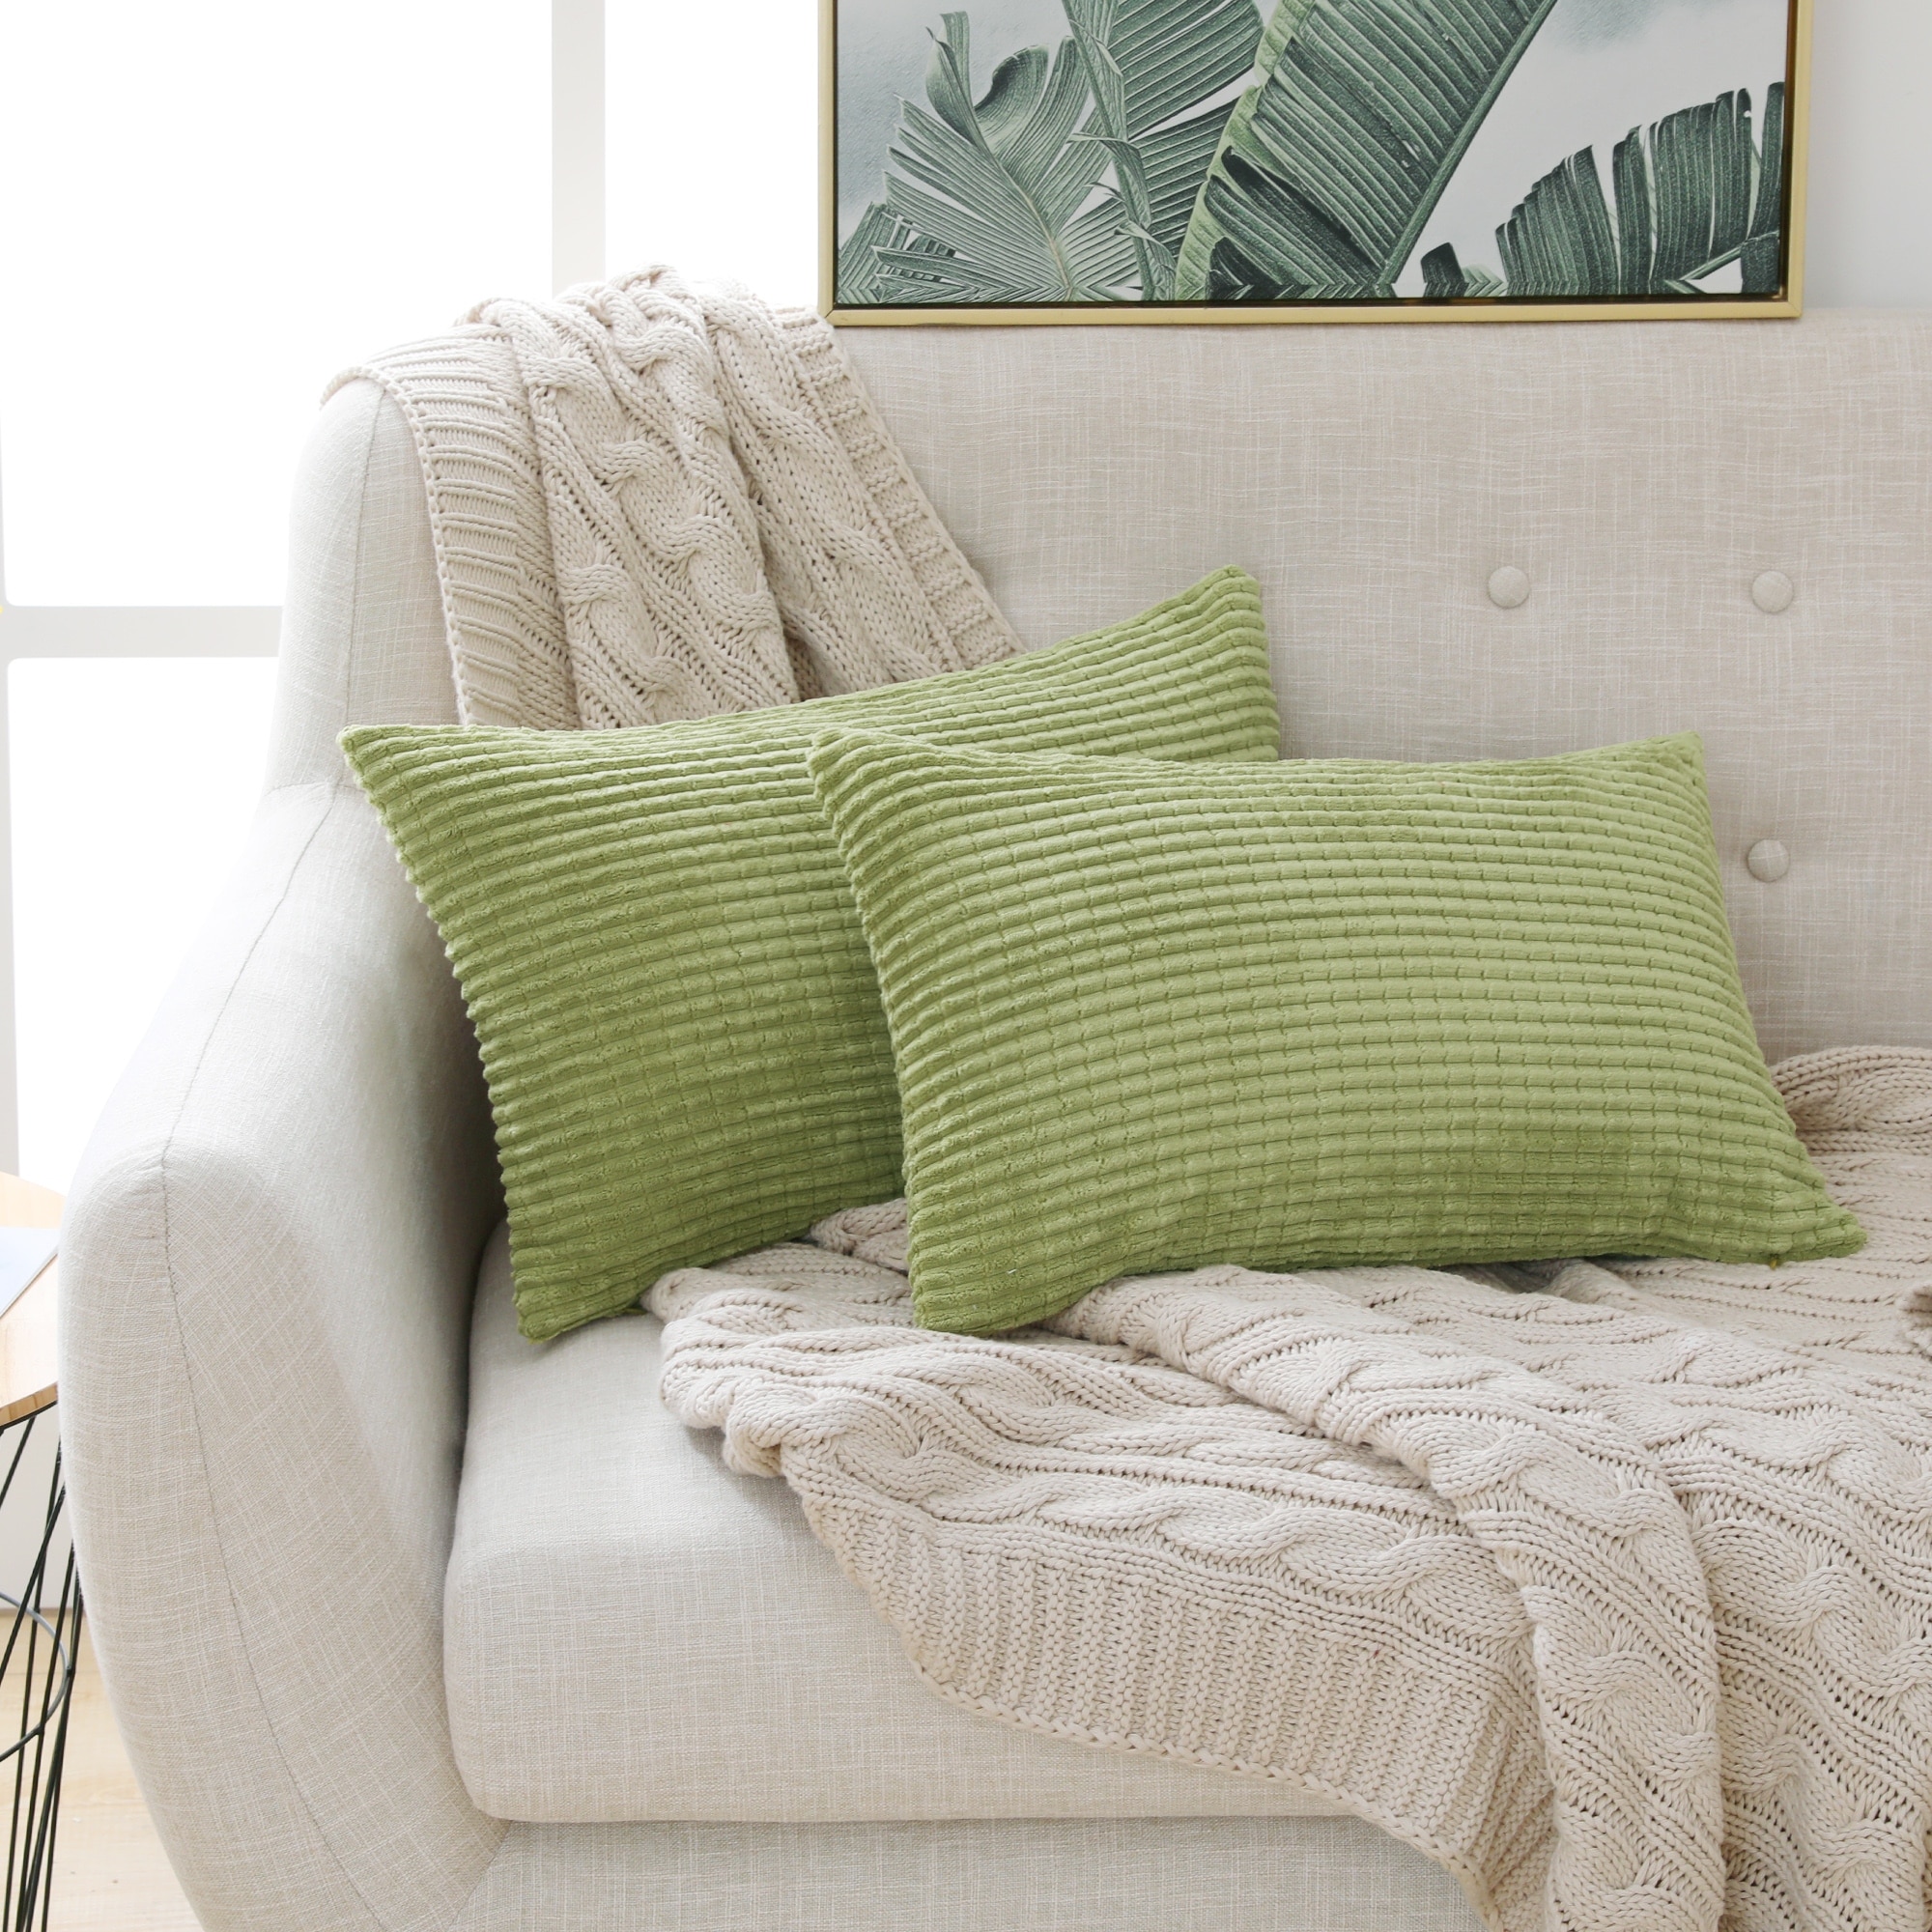 https://ak1.ostkcdn.com/images/products/is/images/direct/9129dbf6902a08b135dd7e888d3b0b309fe1a72c/Deconovo-Corduroy-Throw-Pillow-Covers-2-PCS%28Cover-Only%29.jpg